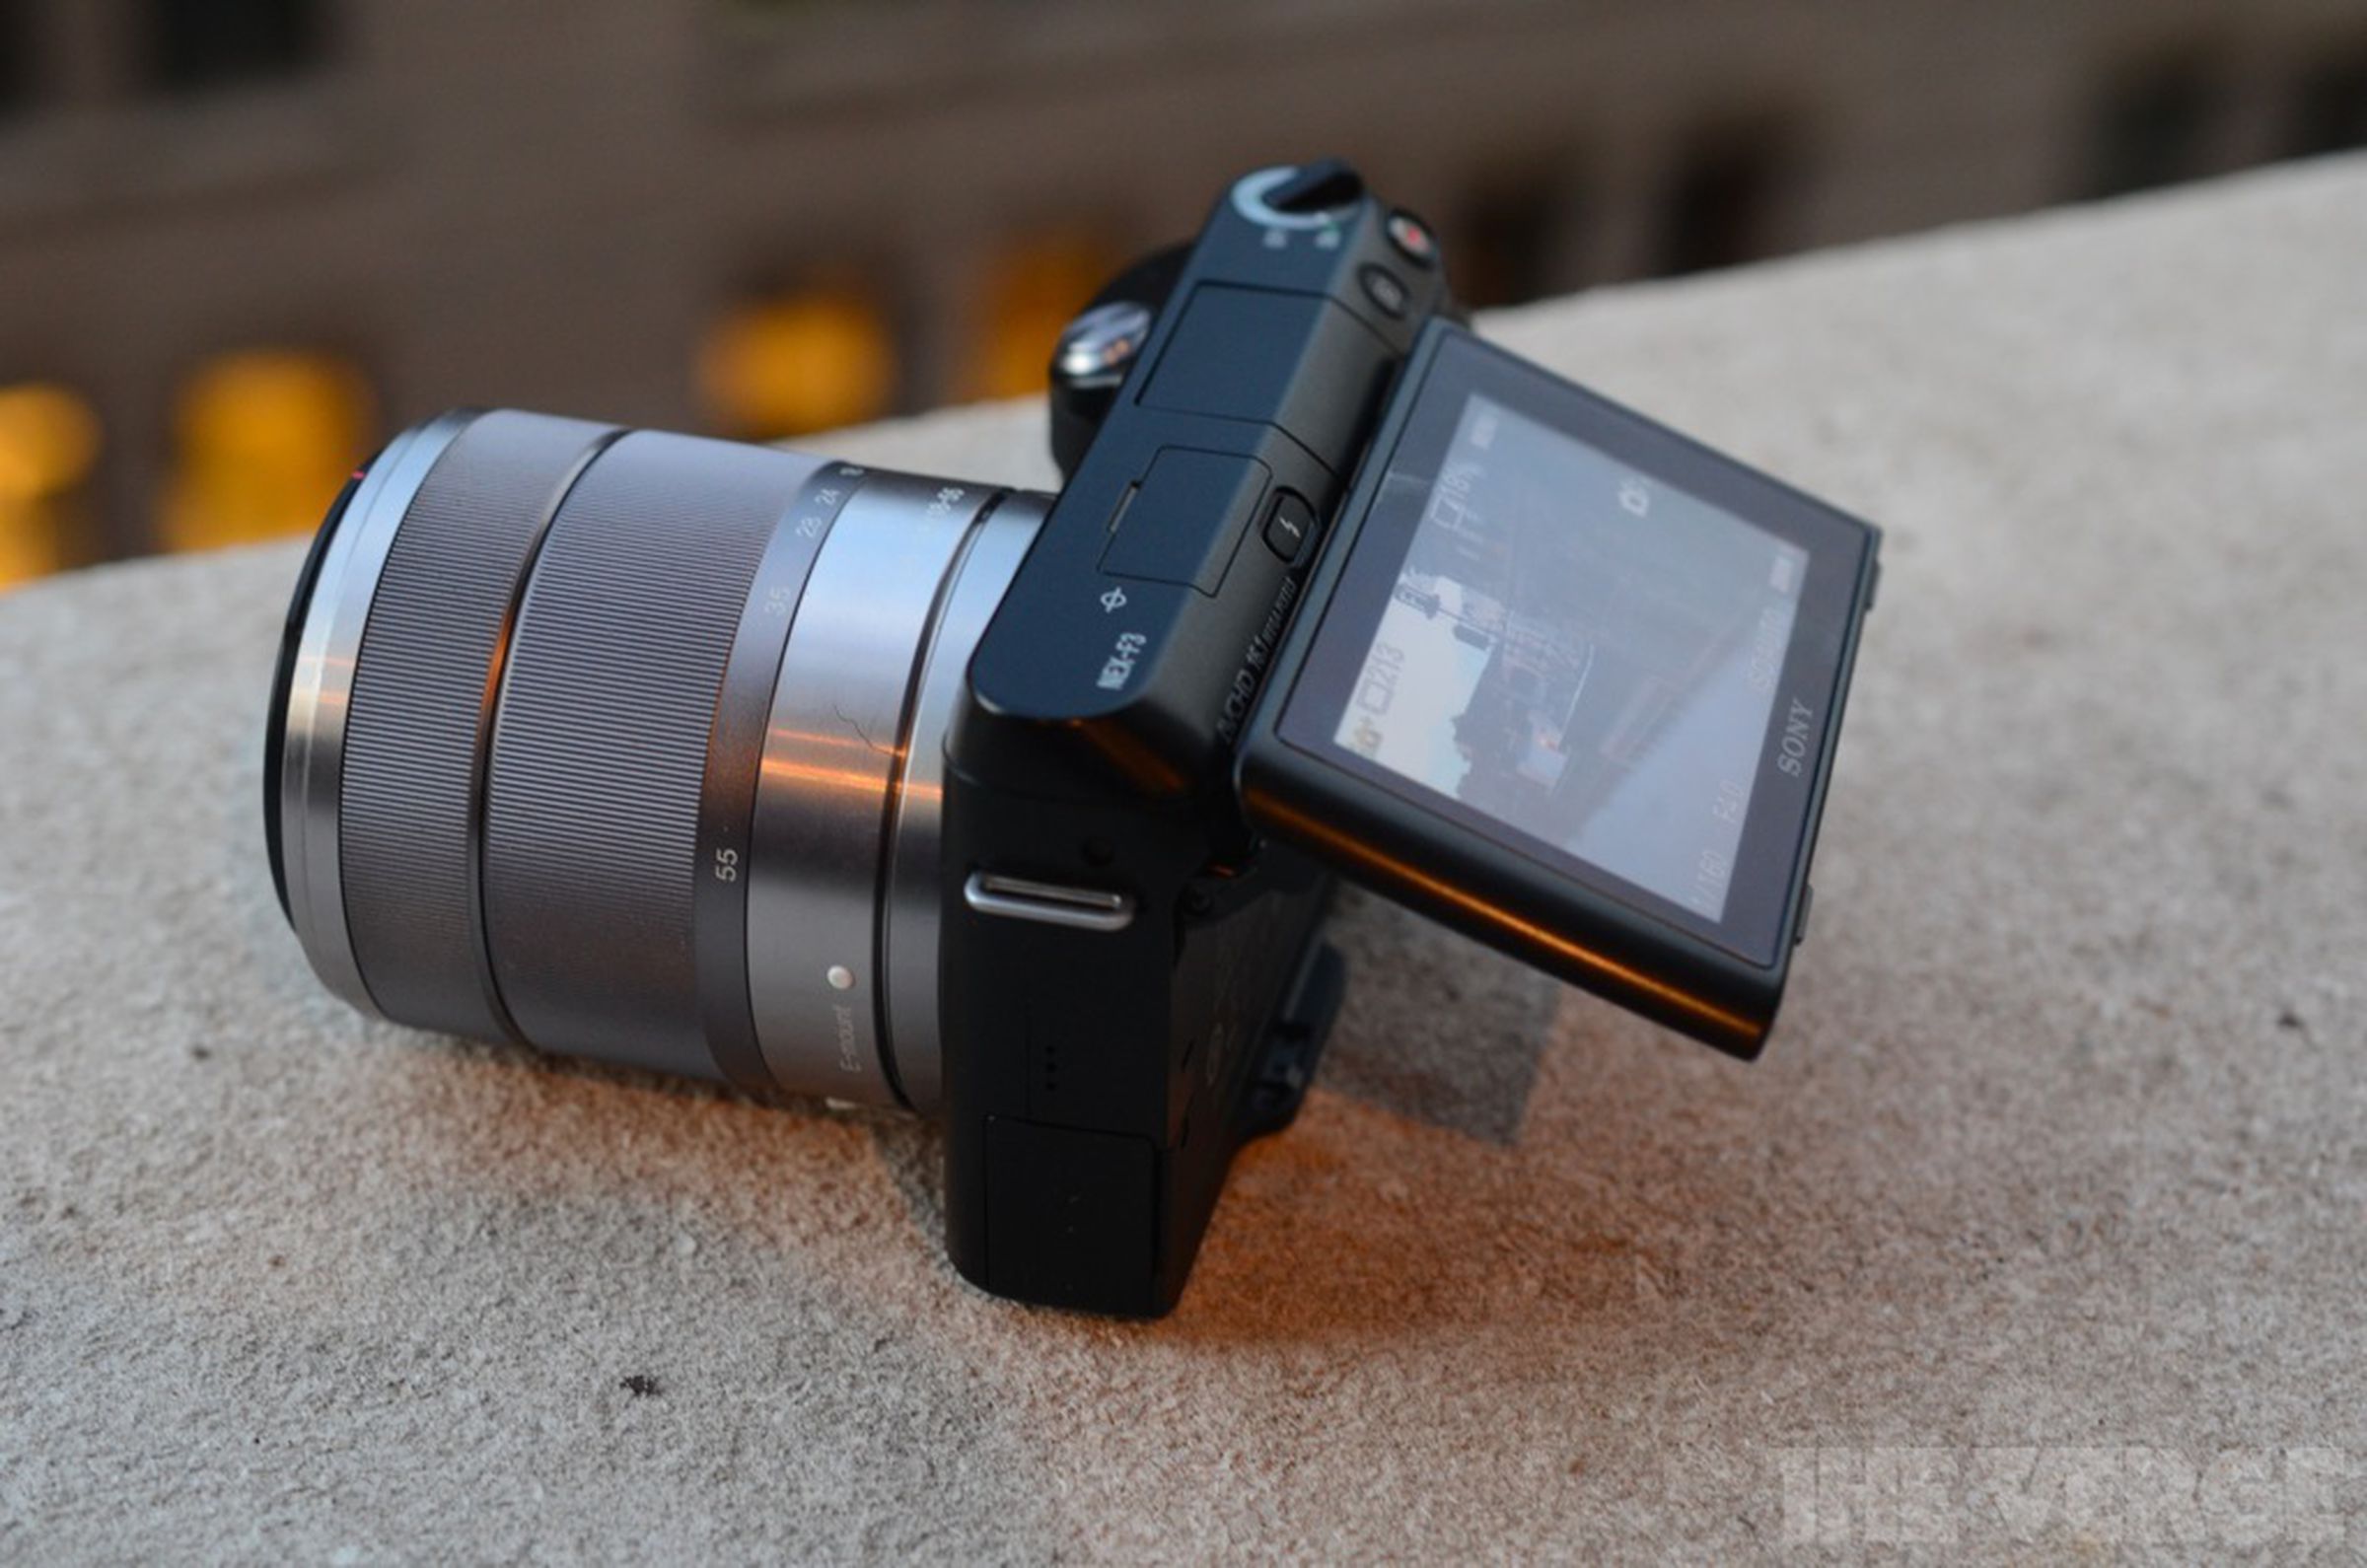 Sony NEX-F3 review pictures